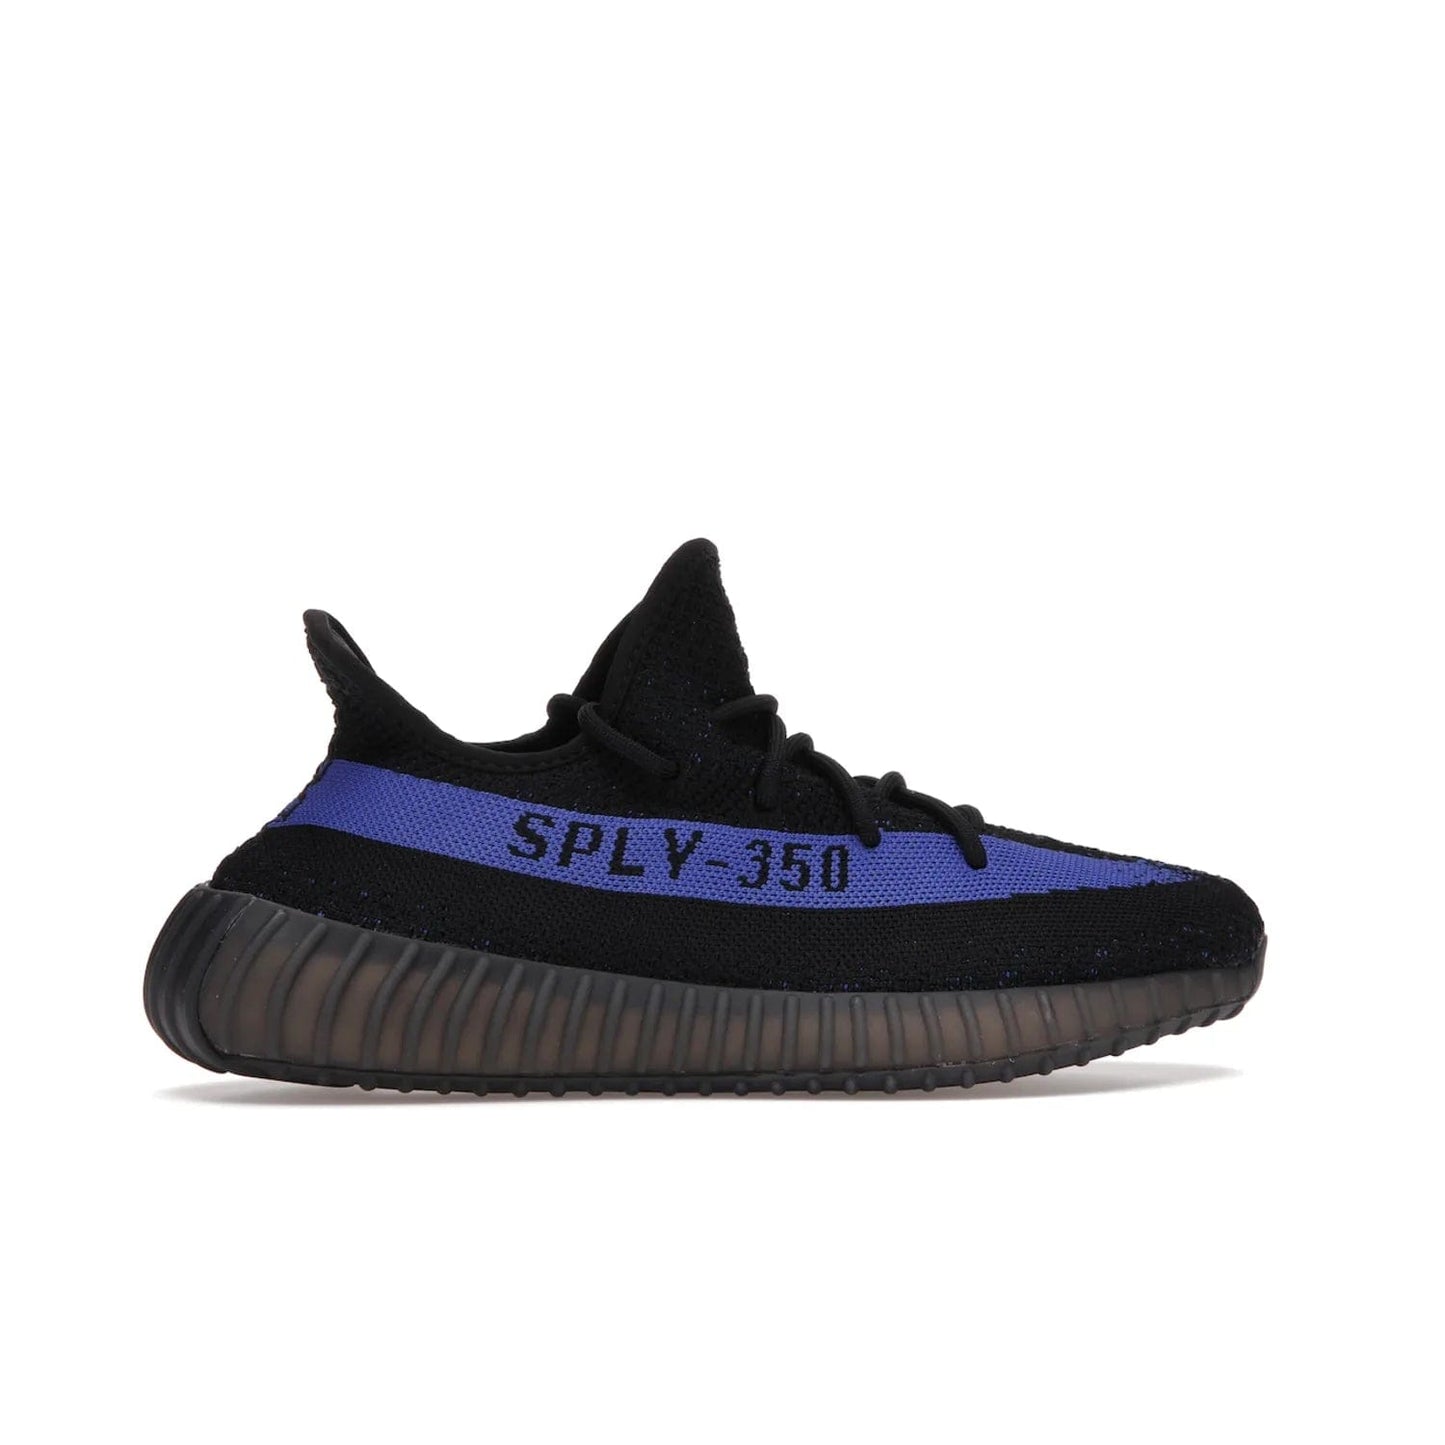 adidas Yeezy Boost 350 V2 Dazzling Blue - Image 36 - Only at www.BallersClubKickz.com - Shop the Adidas Yeezy 350 V2 Dazzling Blue, featuring a solid black Primeknit upper, Dazzling Blue side stripe, “SPLY-350” text, and a muted Boost sole. Releasing Feb 2022, this style is perfect for any shoe fan.